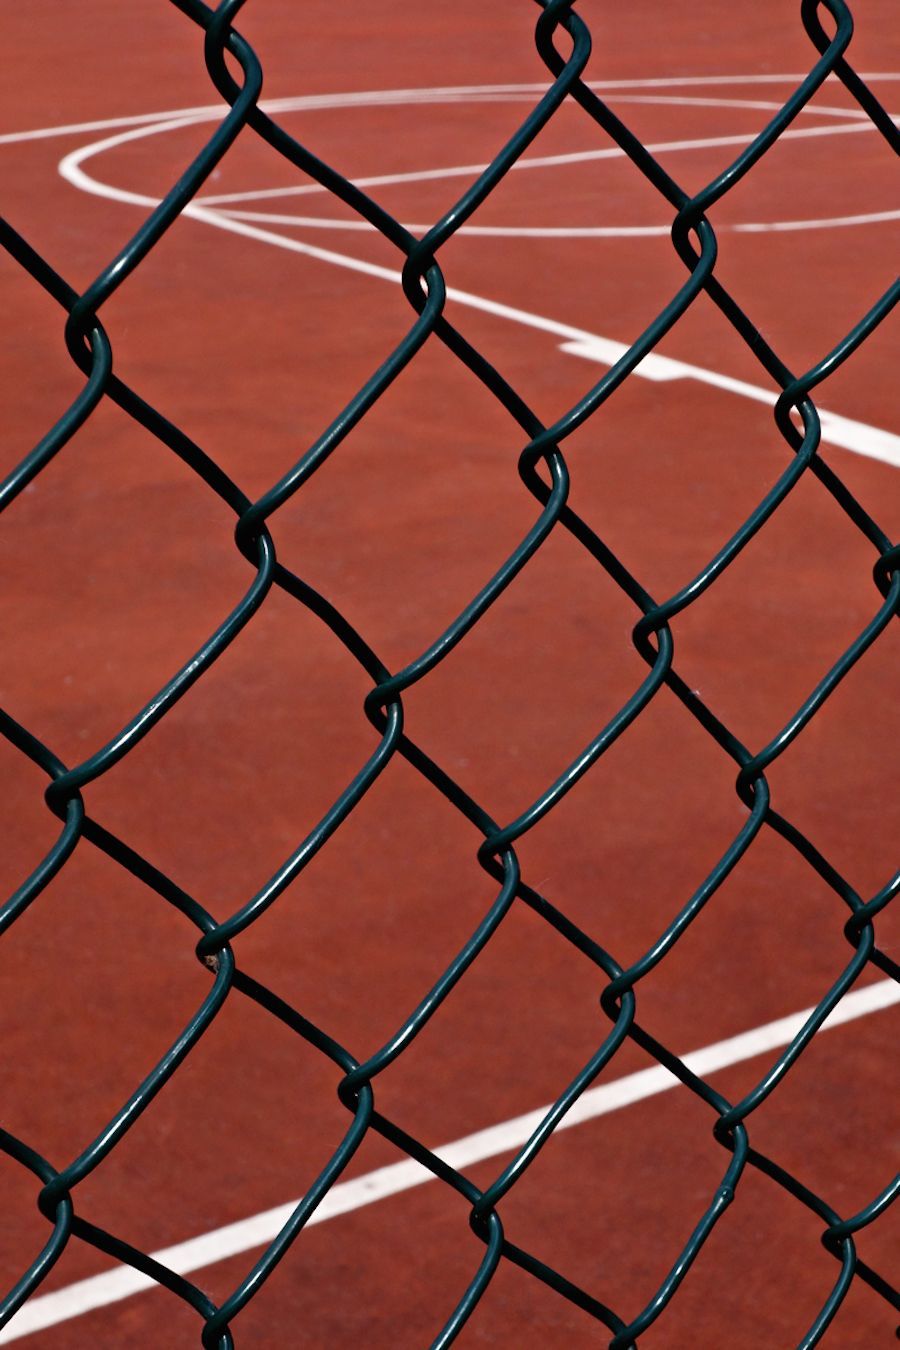 someone special wallpaper,chain link fencing,net,wire fencing,mesh,sport venue